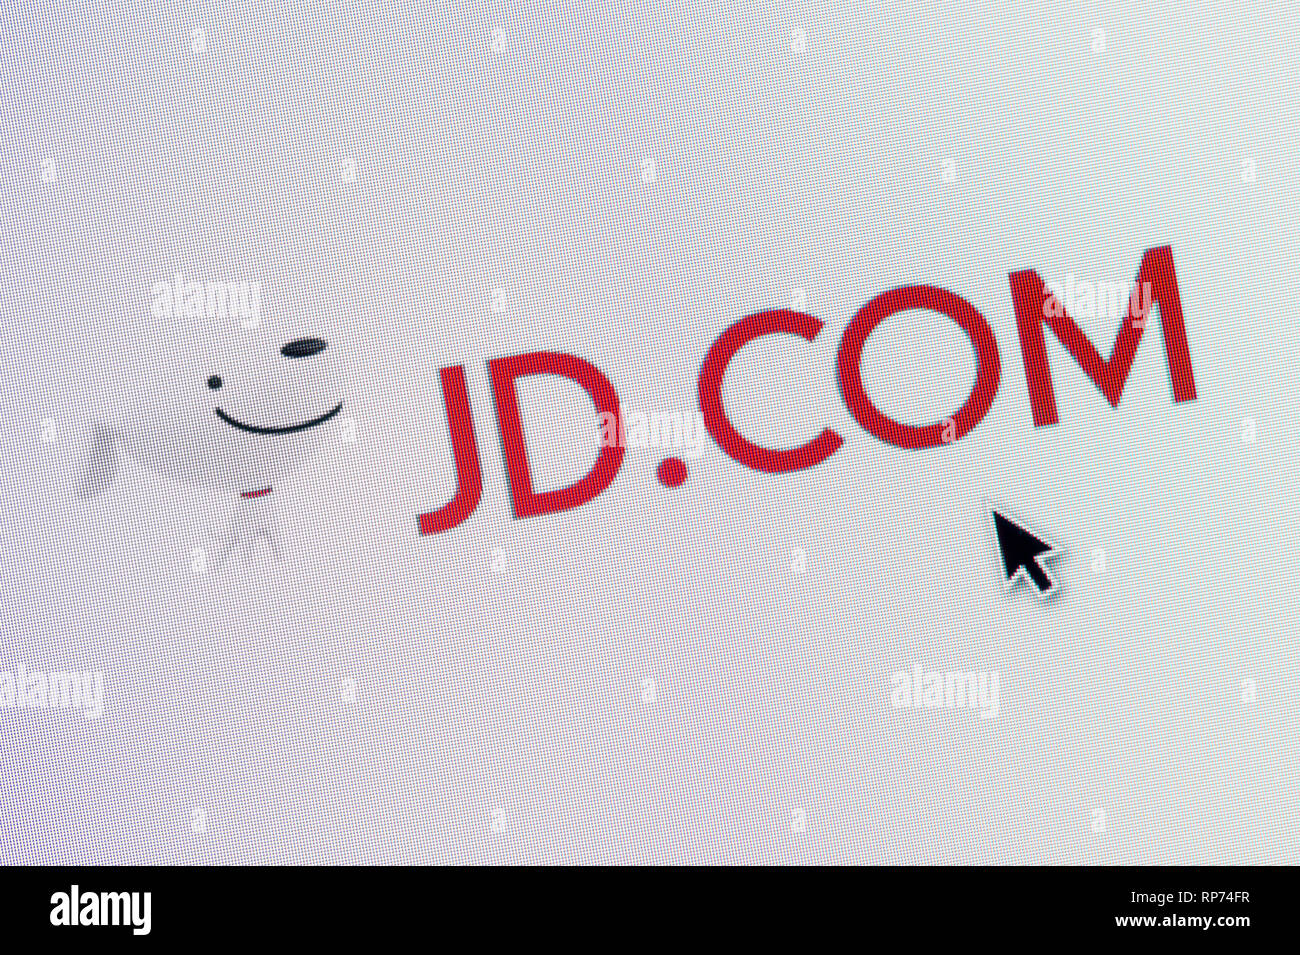 The logo of JD.com (Jingdong) is seen on a computer screen along with a mouse cursor (Editorial use only) Stock Photo